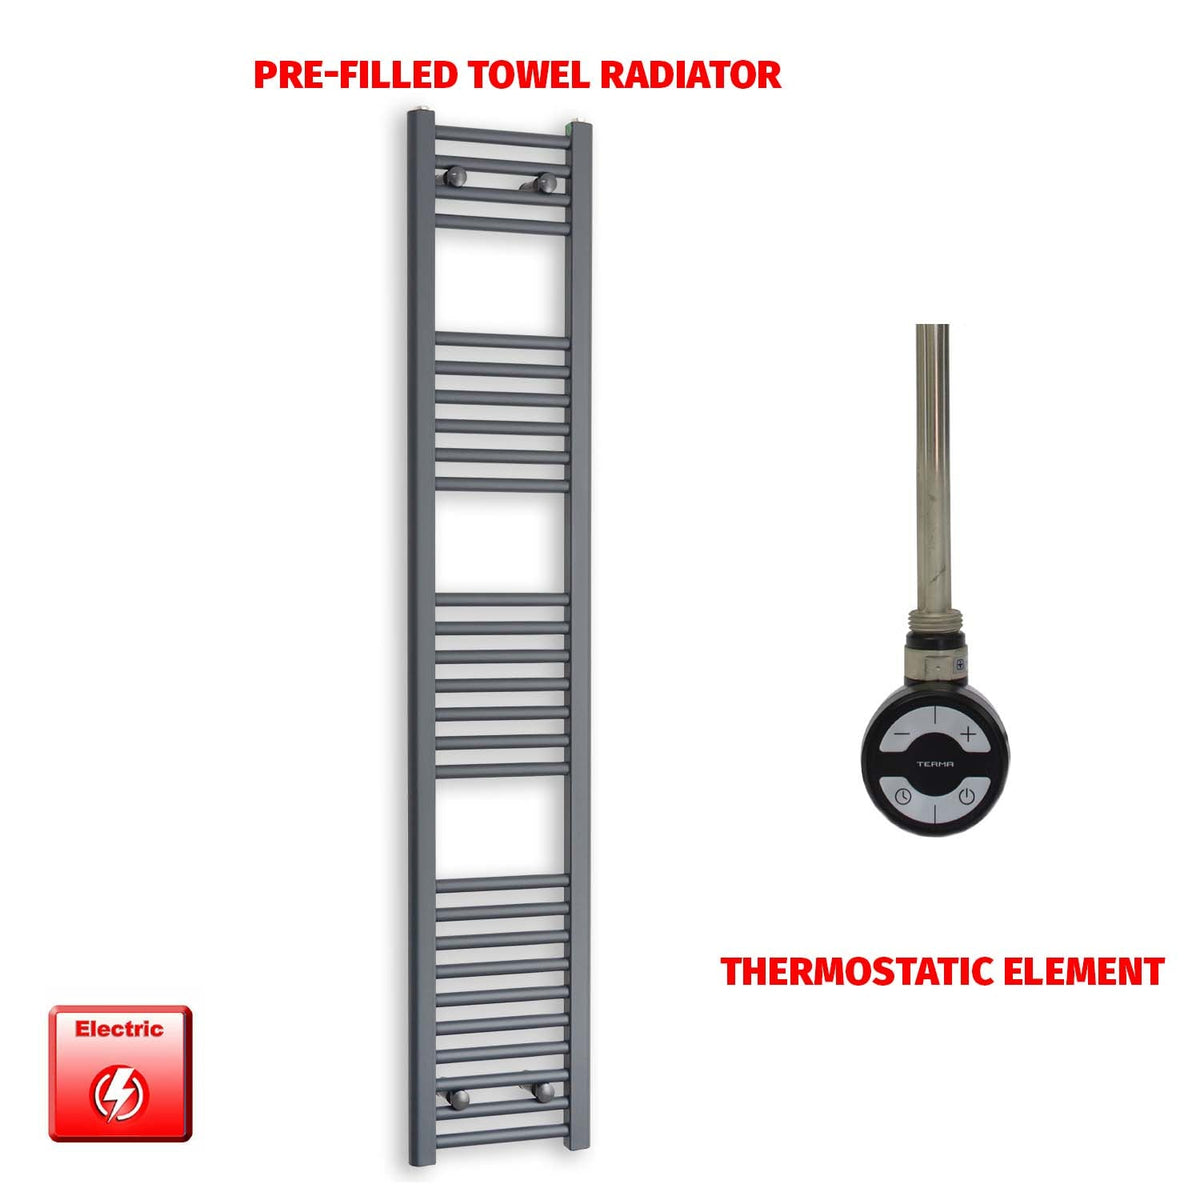 1600 x 300 Flat Anthracite Pre-Filled Electric Heated Towel Radiator HTR MOA Thermostatic element no timer